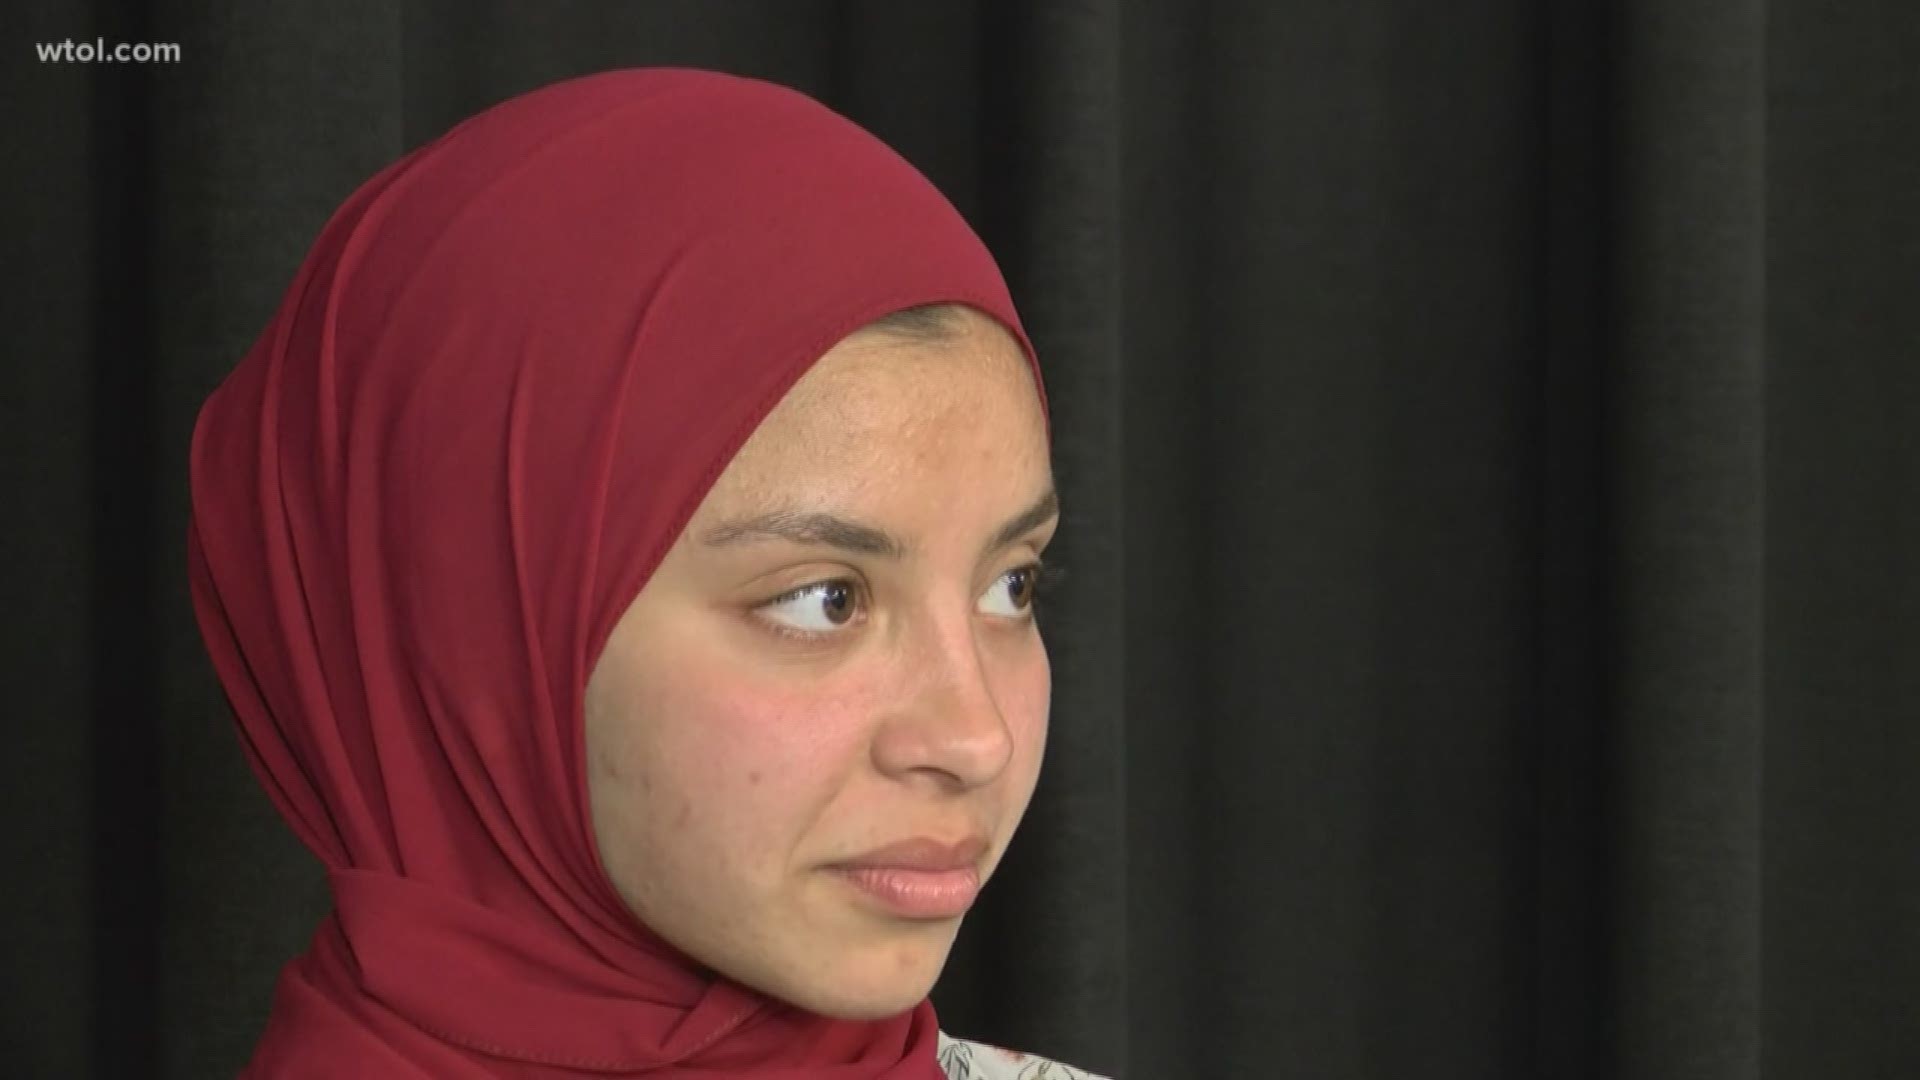 The high school junior has worn the hijab during competitions for three years. An official determined that the hijab was out of compliance, and she needed a waiver.